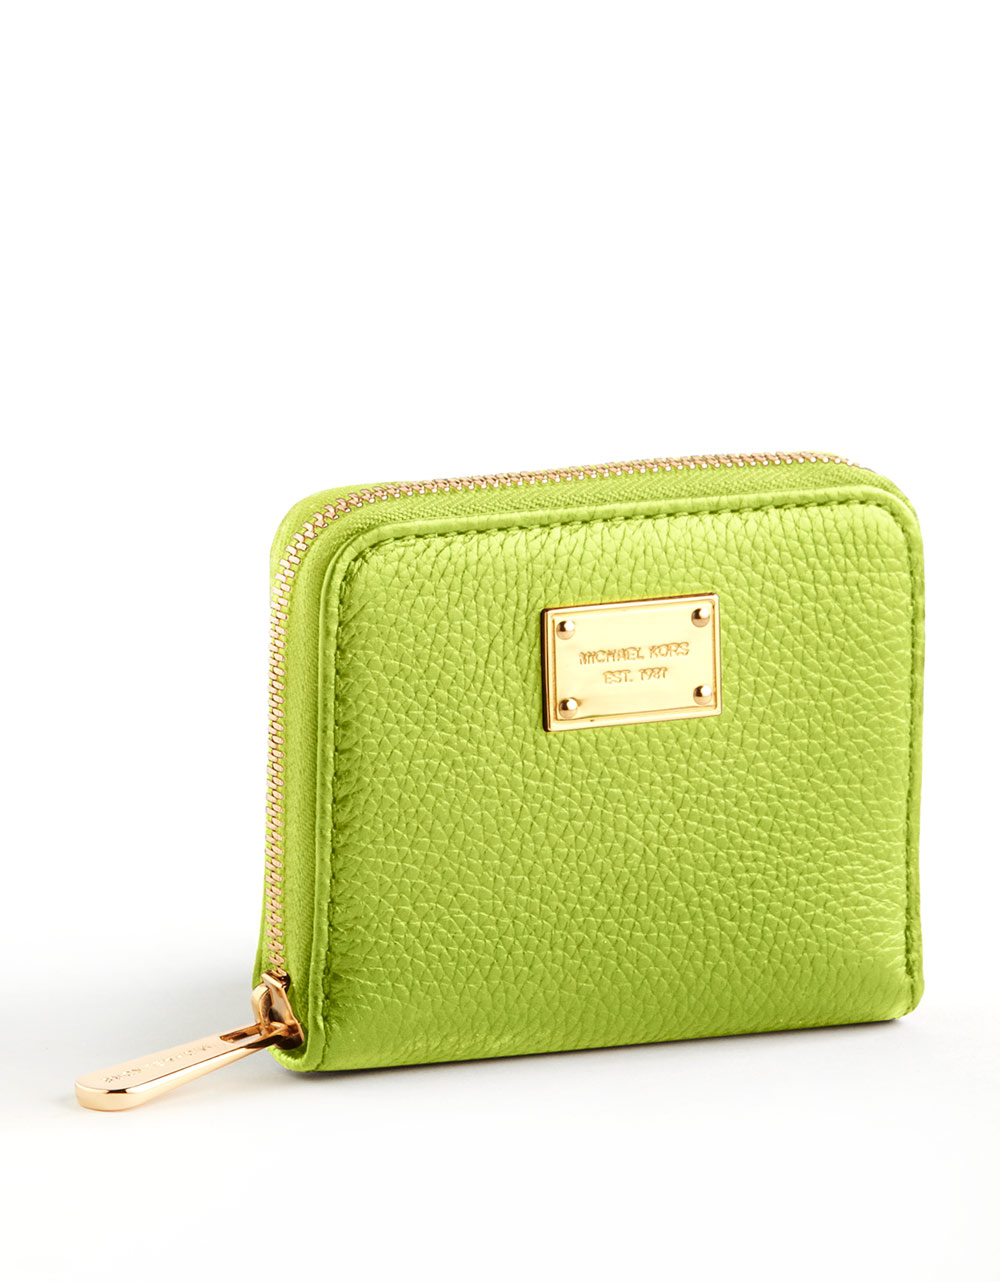 MICHAEL Michael Kors Small Zip Around Leather Wallet in Lime (Green) - Lyst